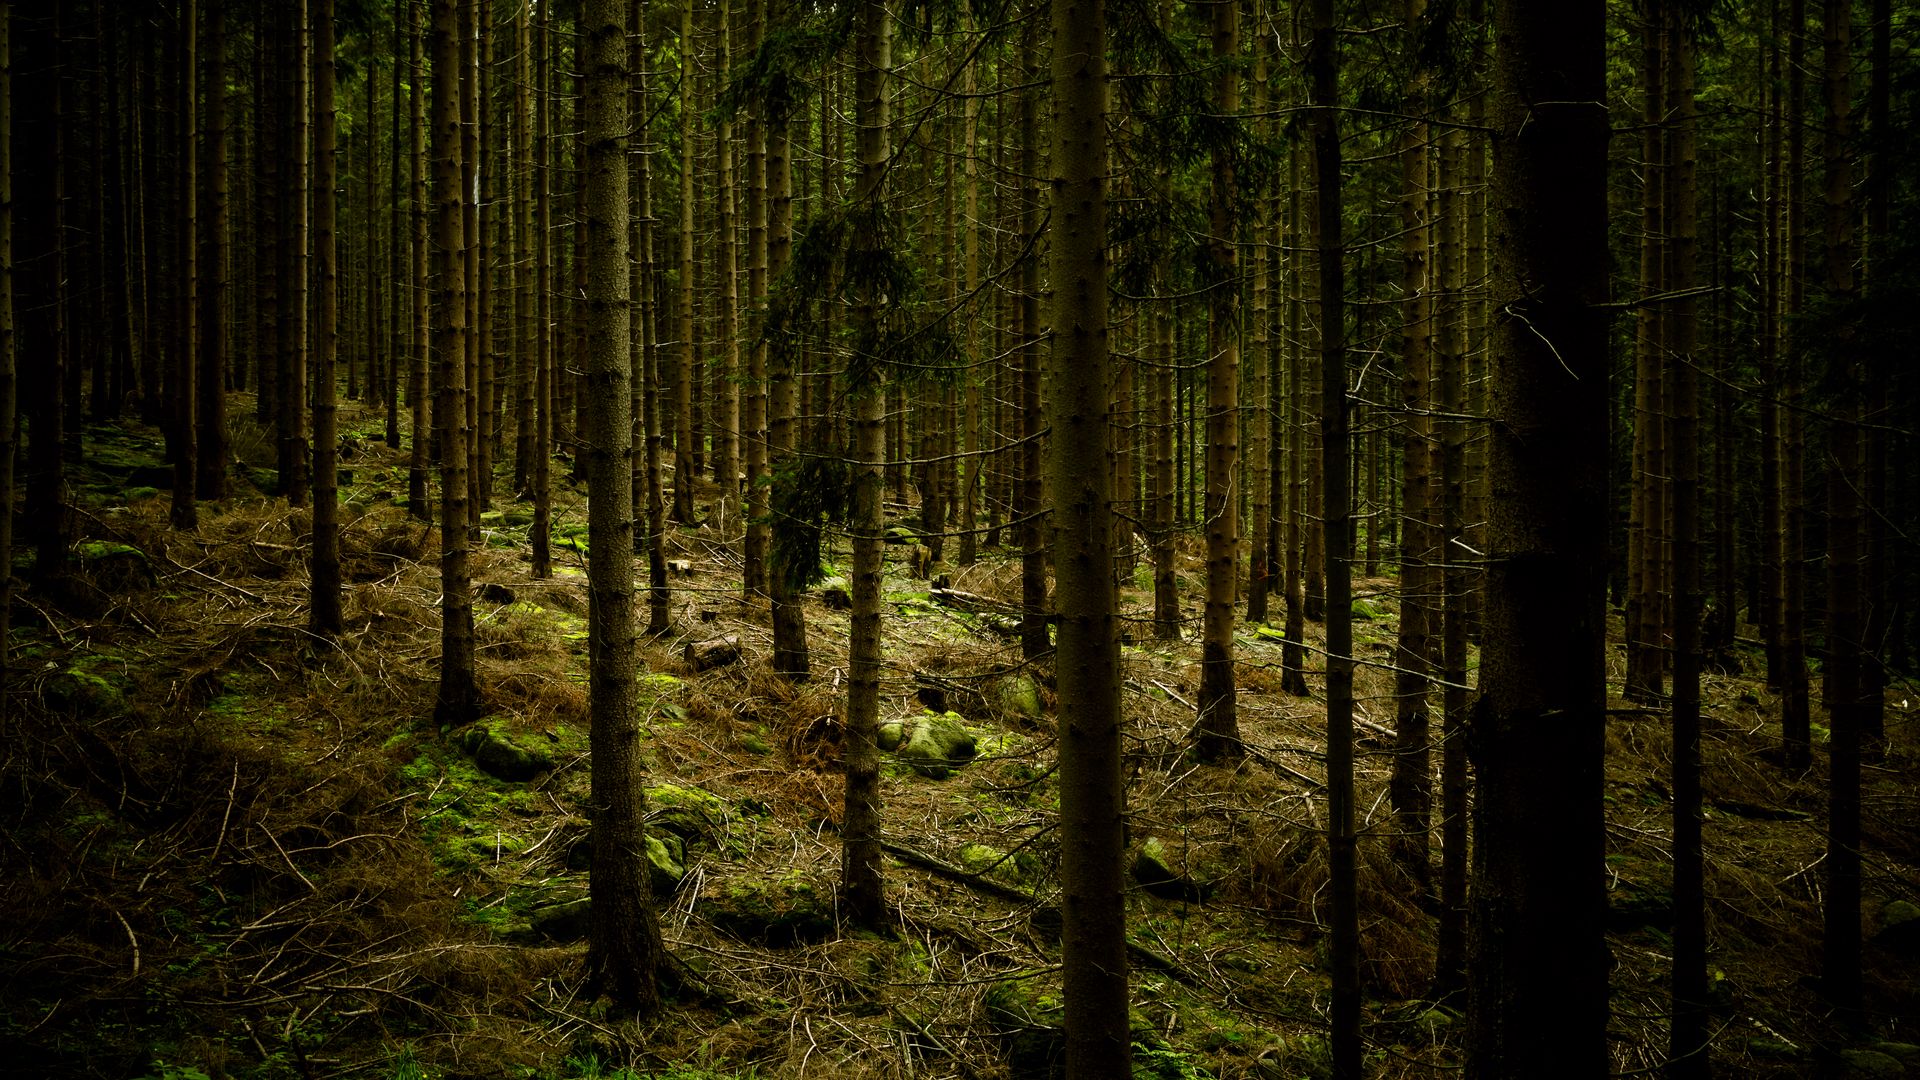 Download wallpaper 1920x1080 dark, forest, trees, gloomy full hd, hdtv,  fhd, 1080p hd background